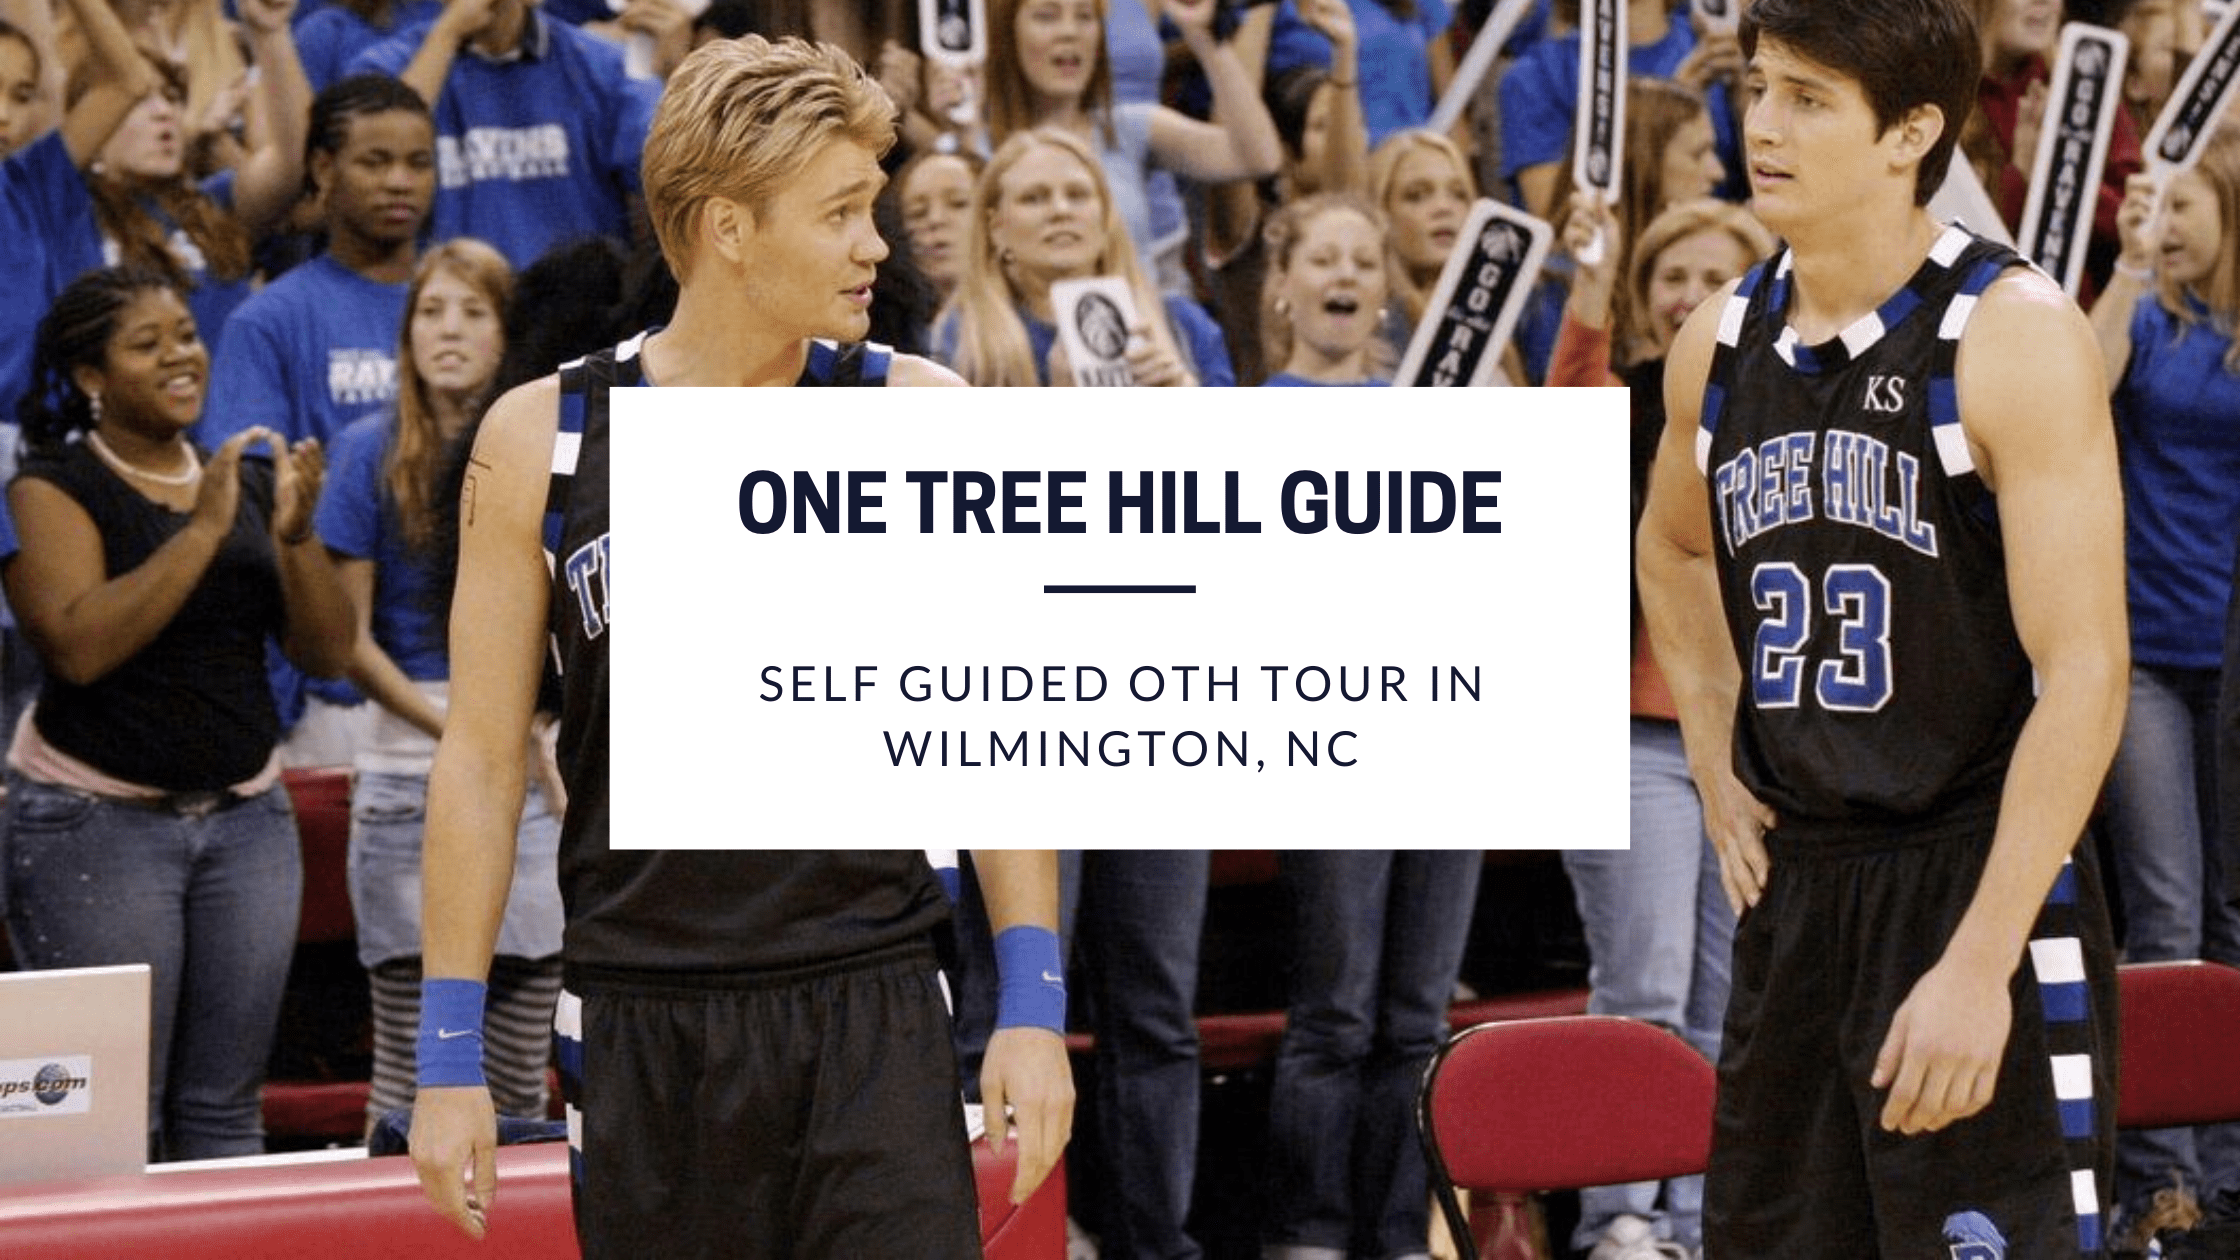 One Tree Hill self guided tour in wilmington